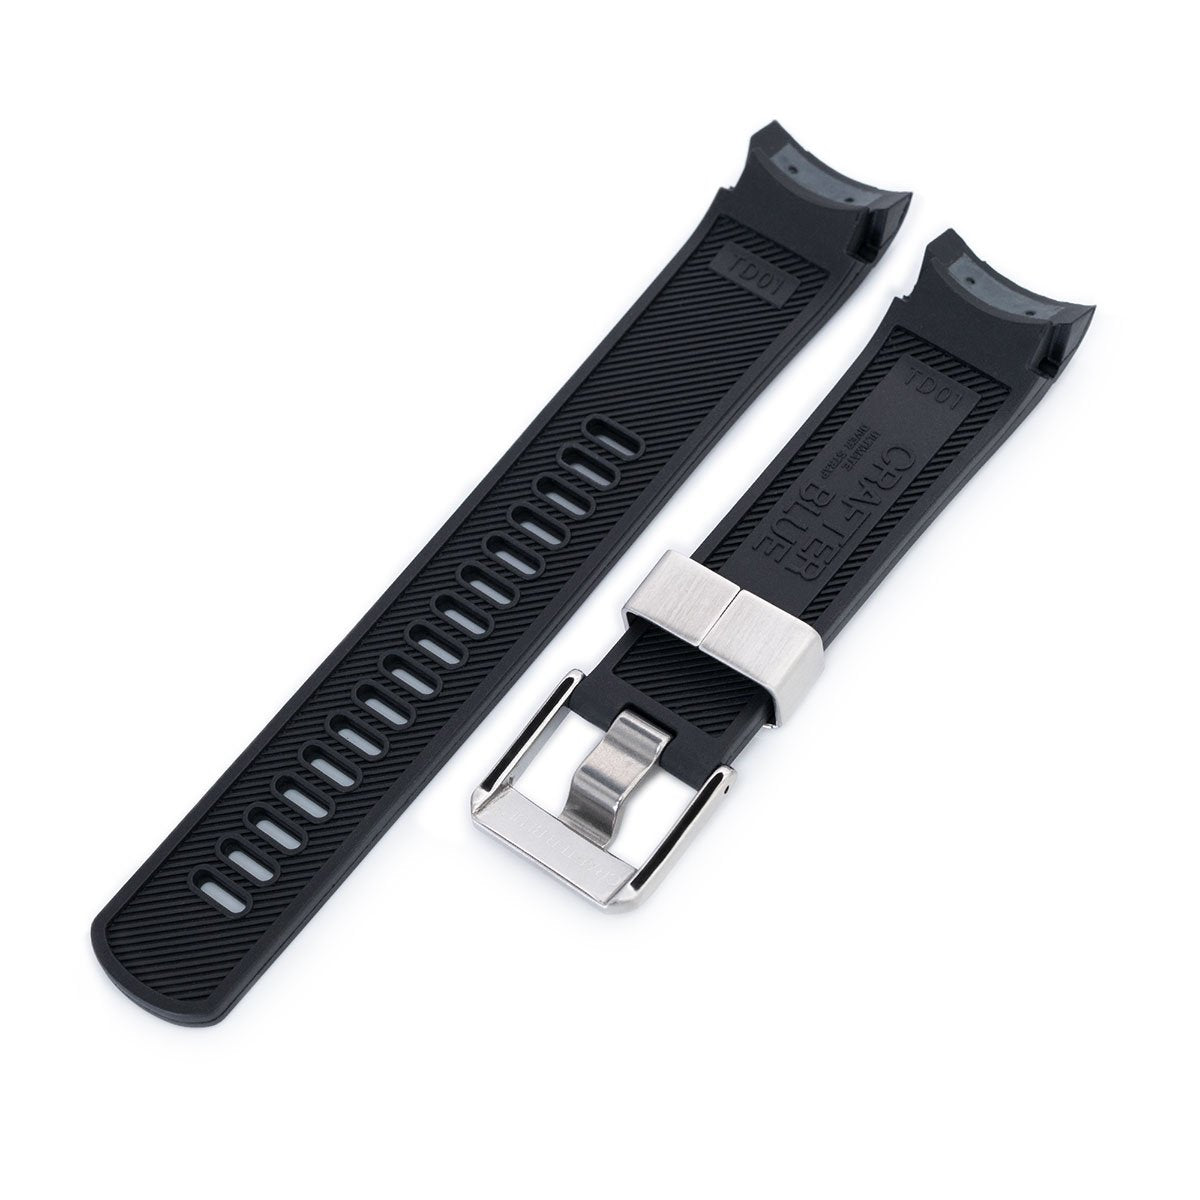 22mm Crafter Blue Black Rubber Curved Lug Watch Strap for TUD BB M79230 Strapcode Watch Bands